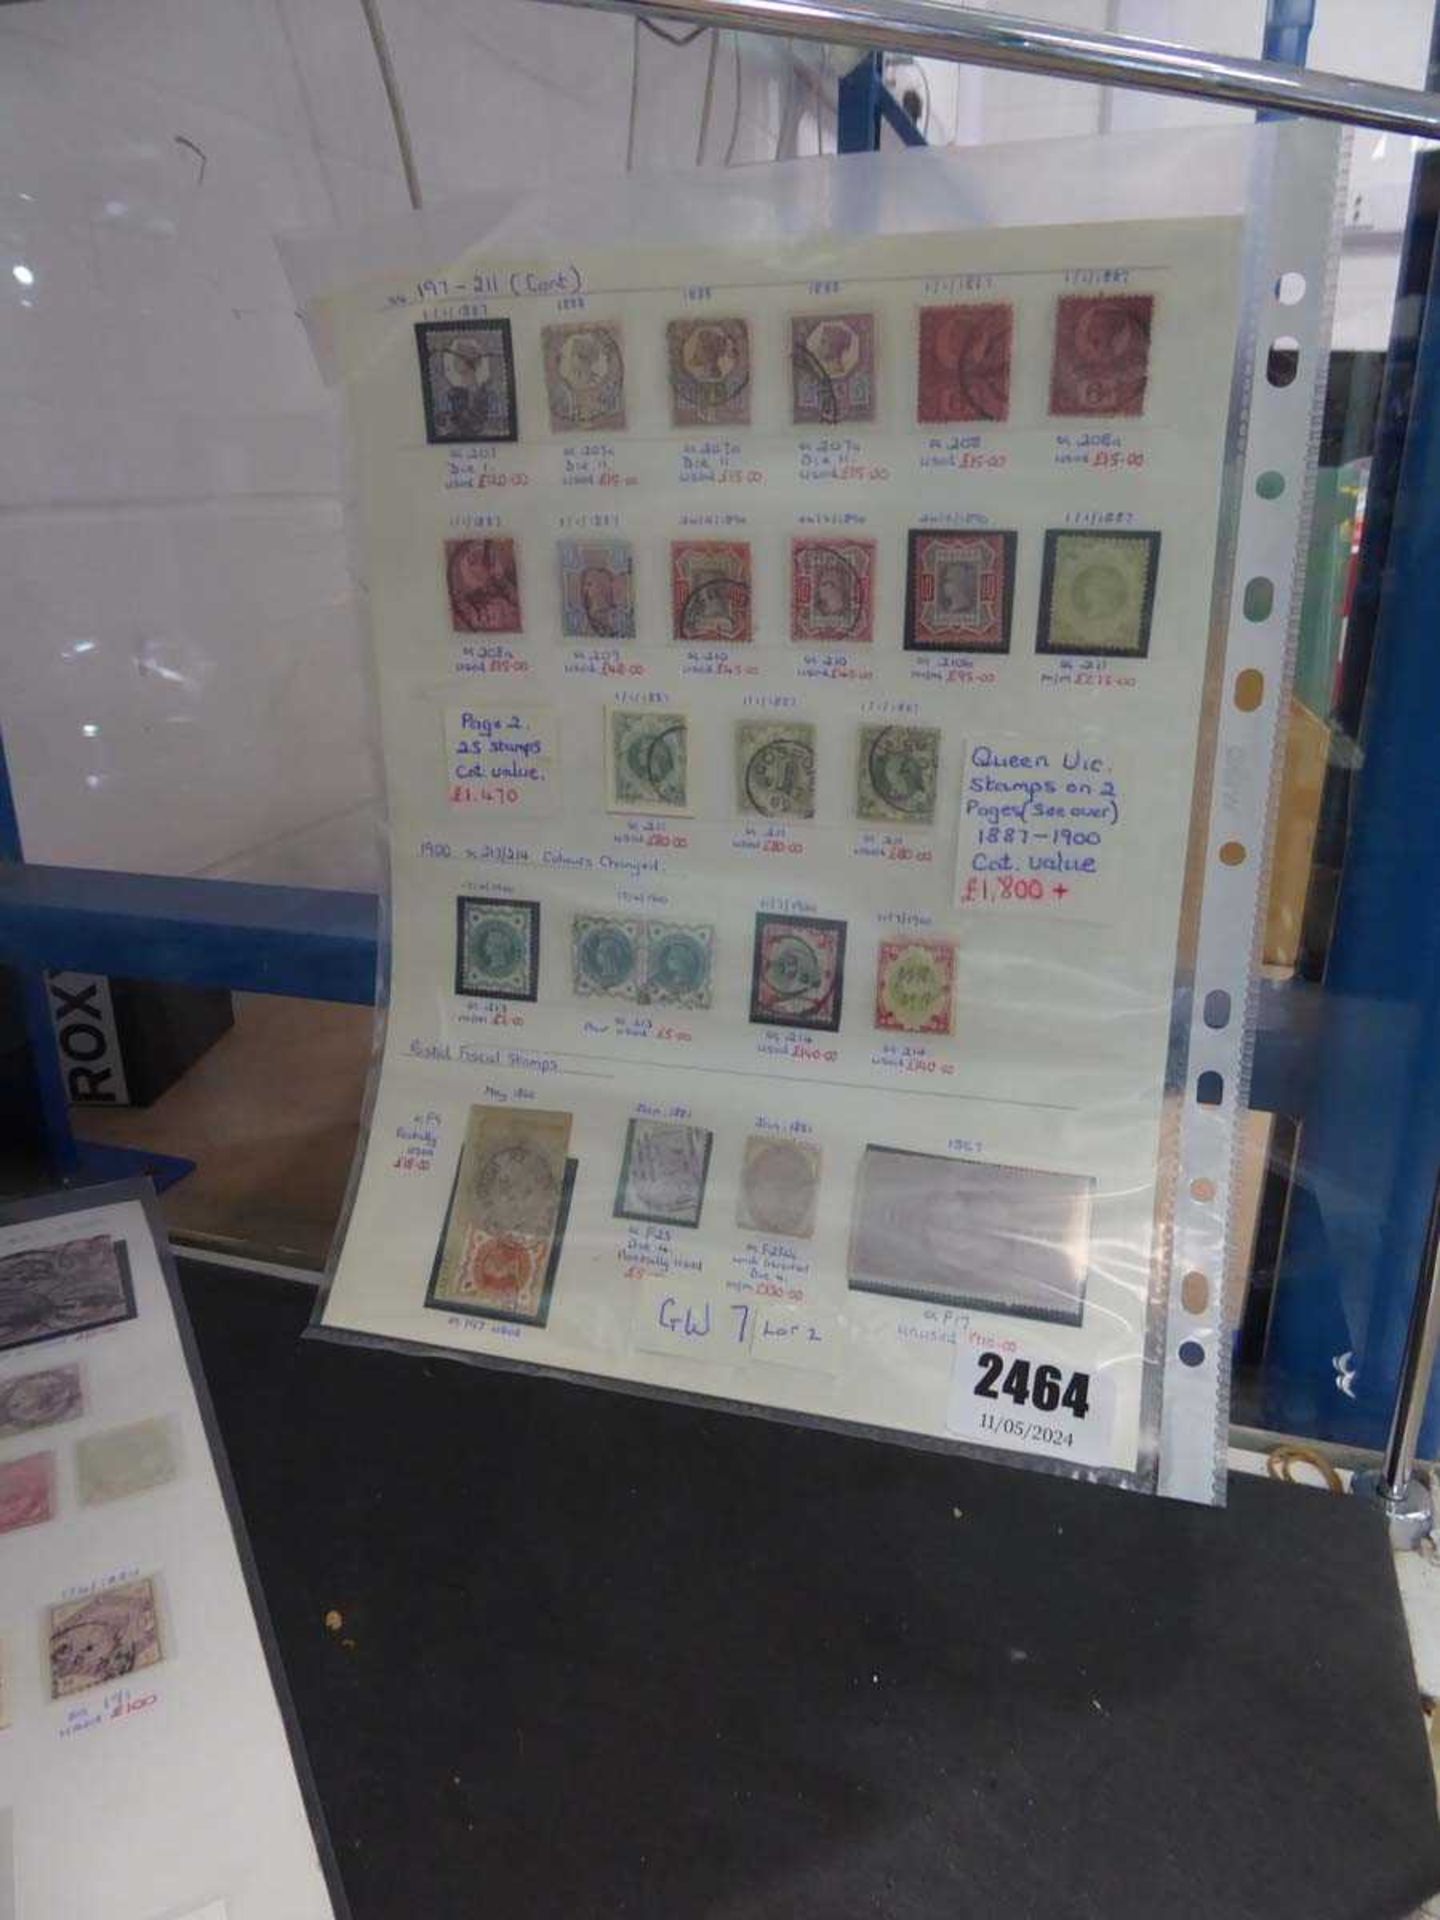 2 pages of Queen Victoria stamps from 1887 - 1900